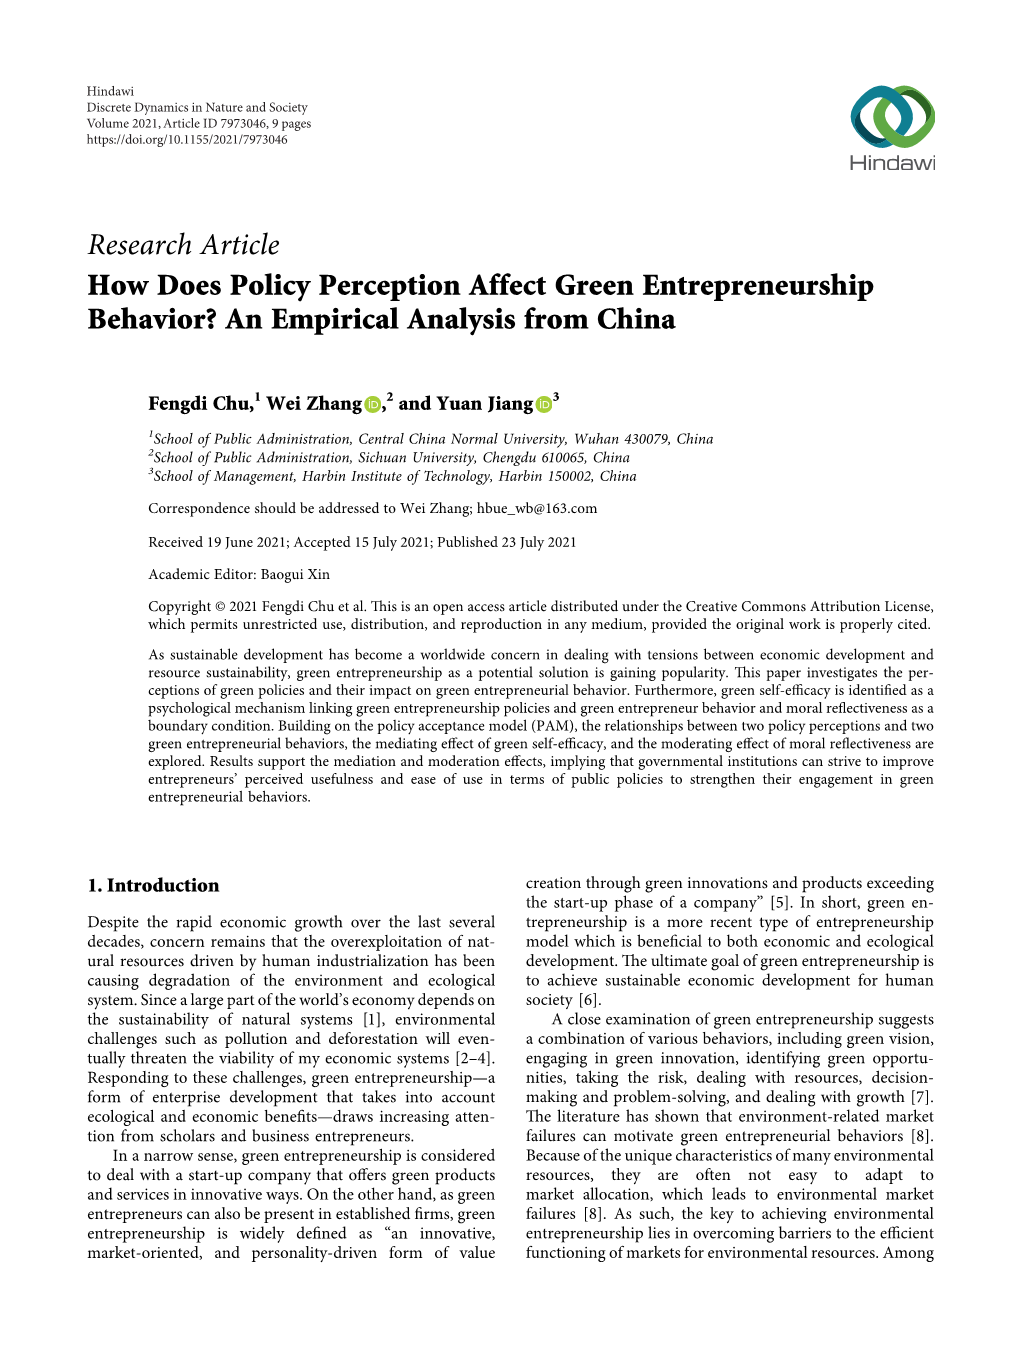 How Does Policy Perception Affect Green Entrepreneurship Behavior? an Empirical Analysis from China